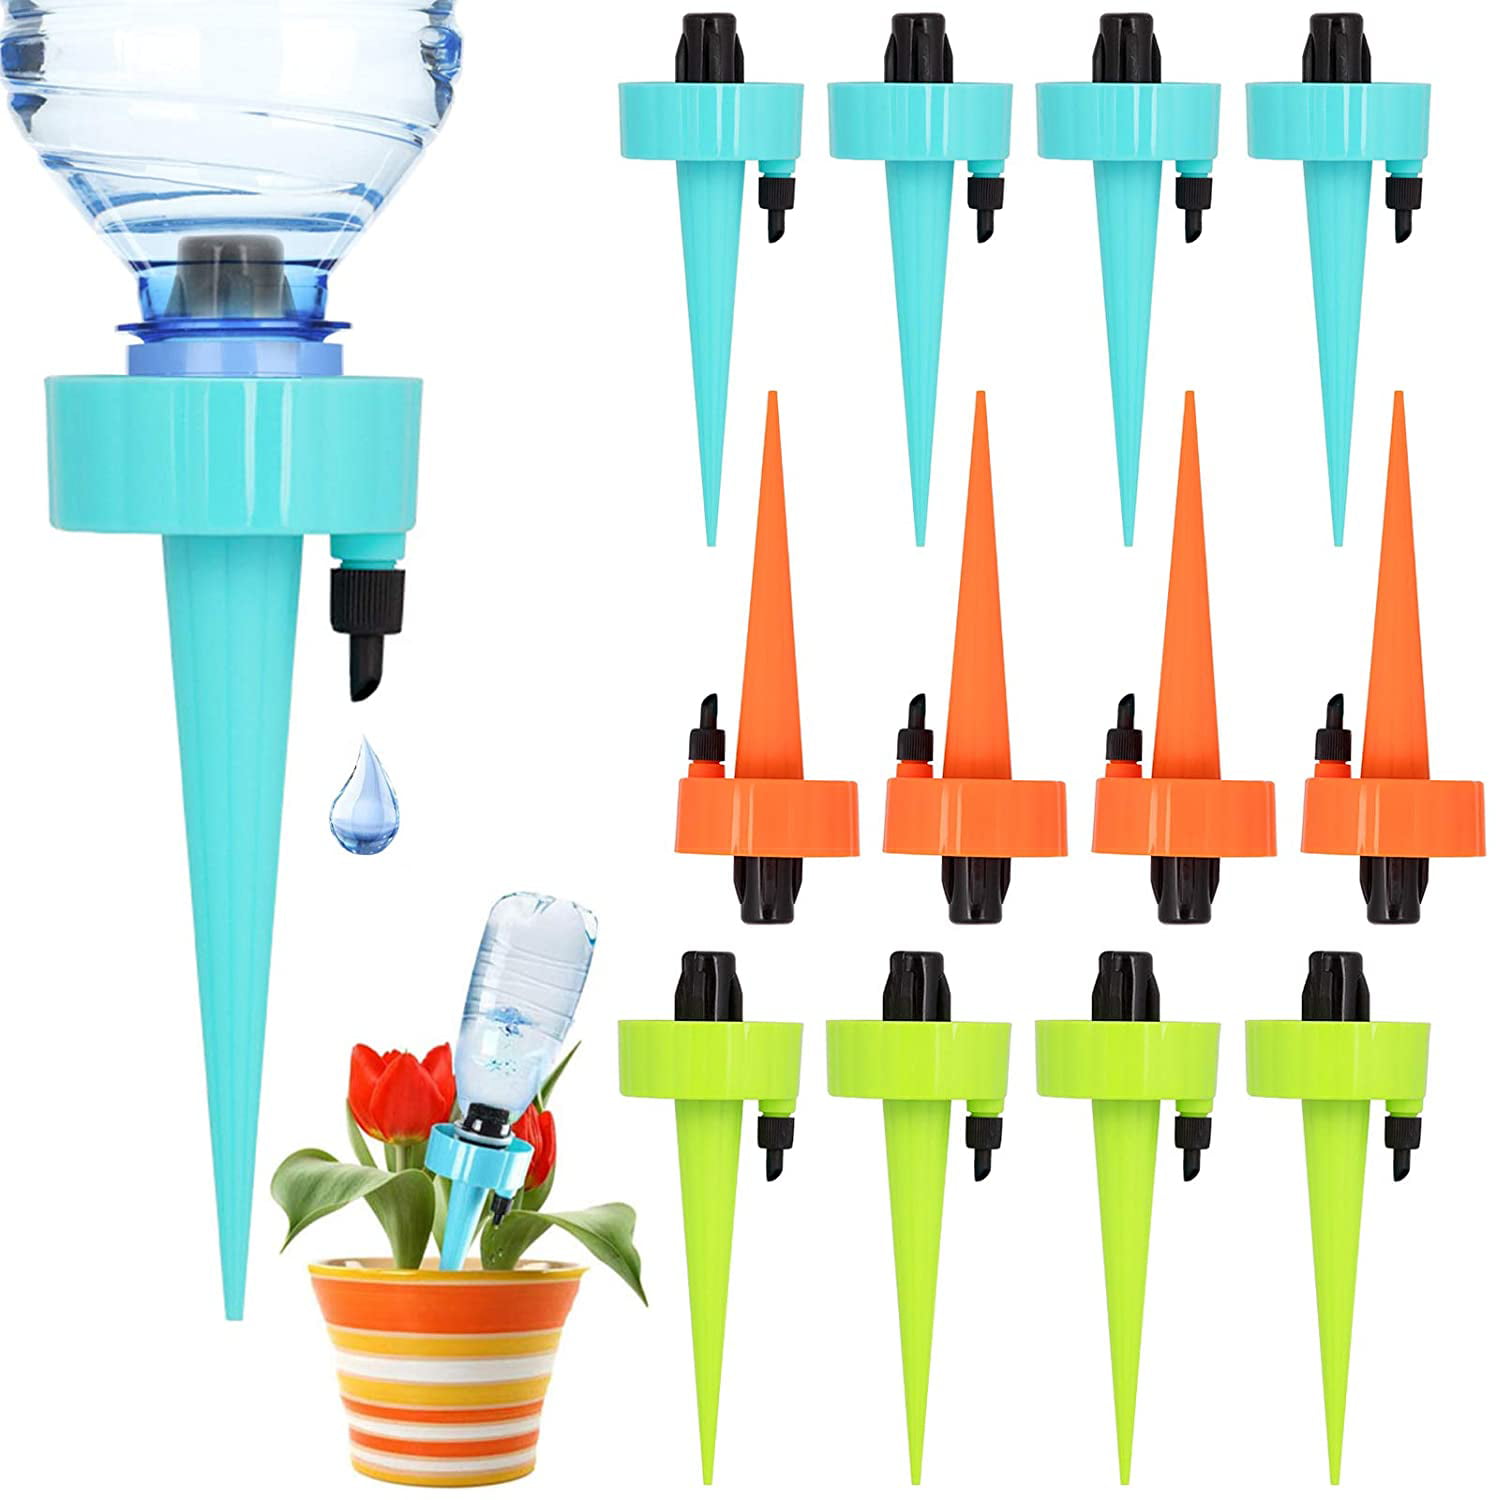 New Automatic Water Irrigation Control System Big Pack / - 15pcs 